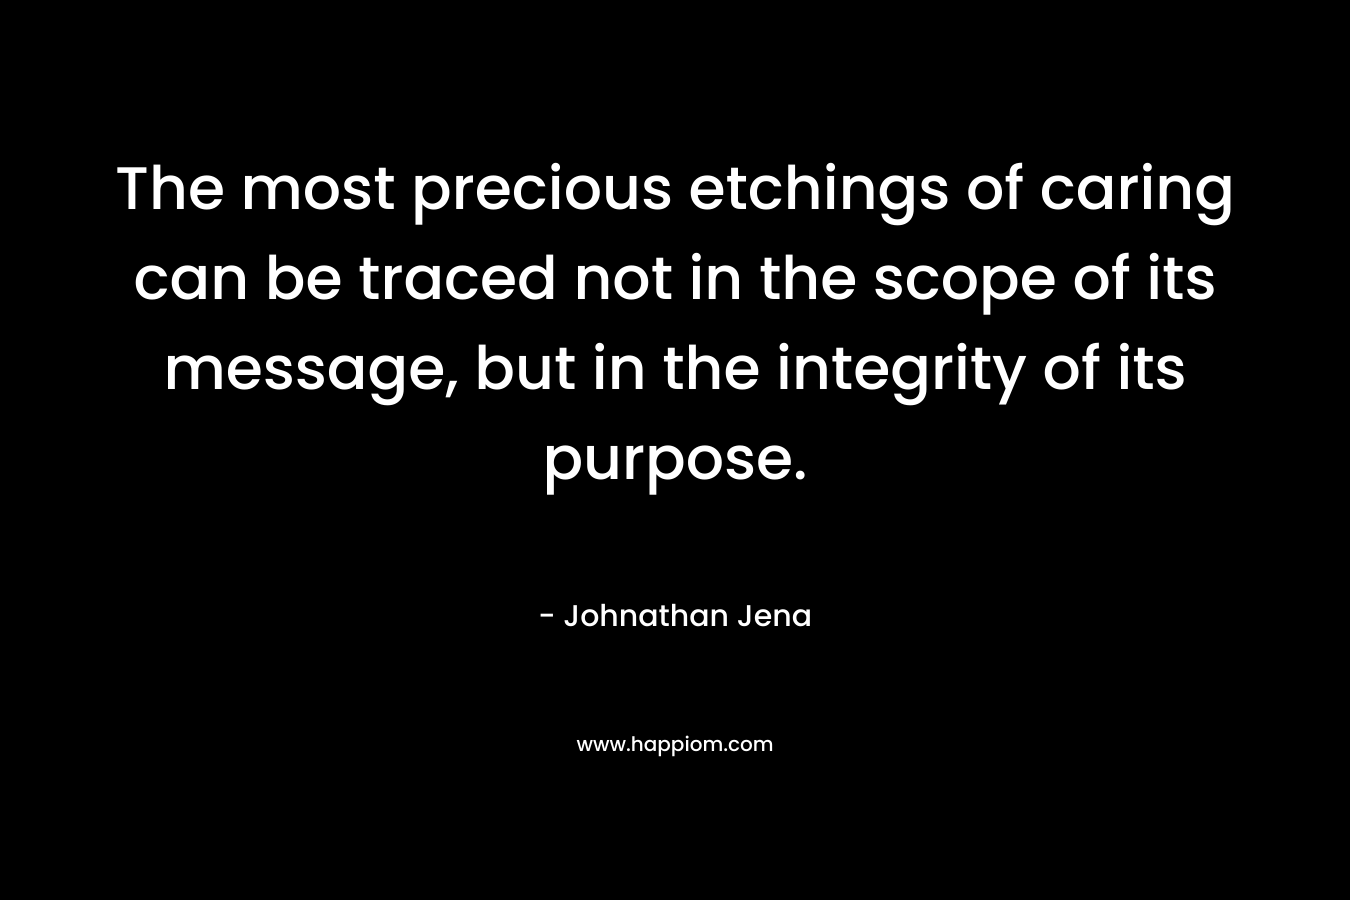 The most precious etchings of caring can be traced not in the scope of its message, but in the integrity of its purpose.